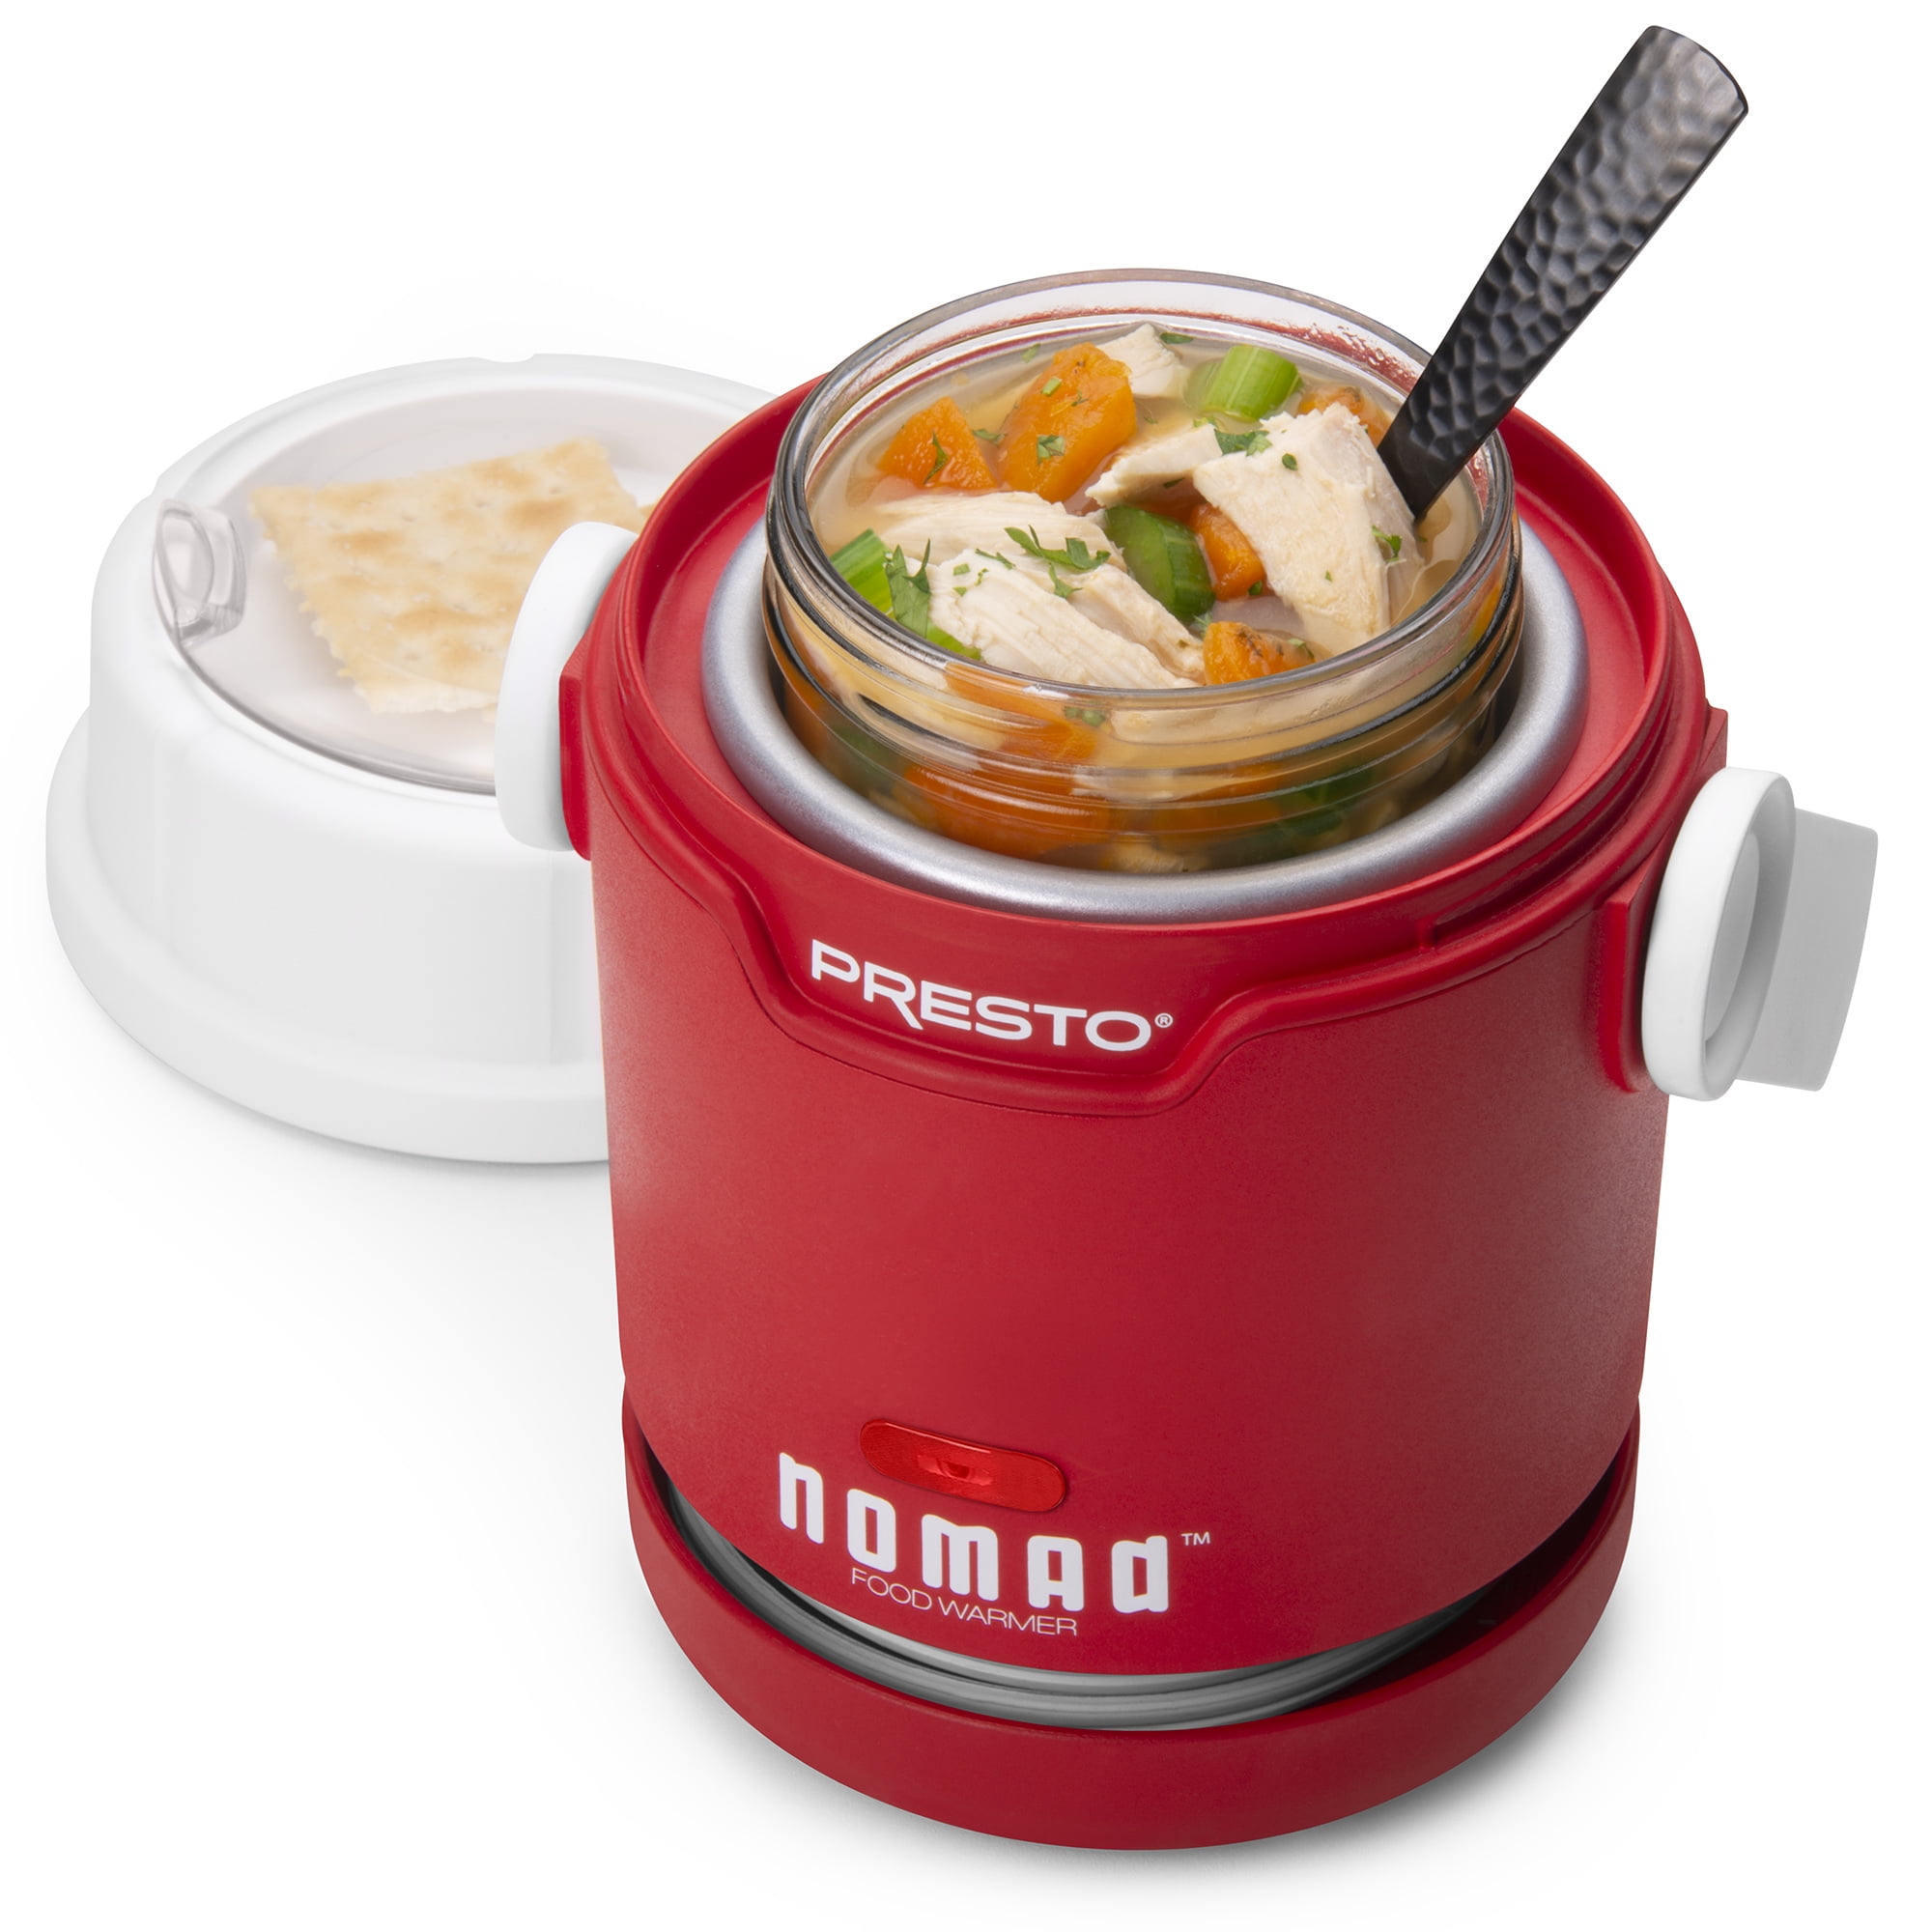  Presto 6011 Slow Cooker, 7.4 x 12.5 x 15.9, Red & 06015  Nomad Mason Jar Traveling Food Warmer, 1 Pint, Red: Home & Kitchen